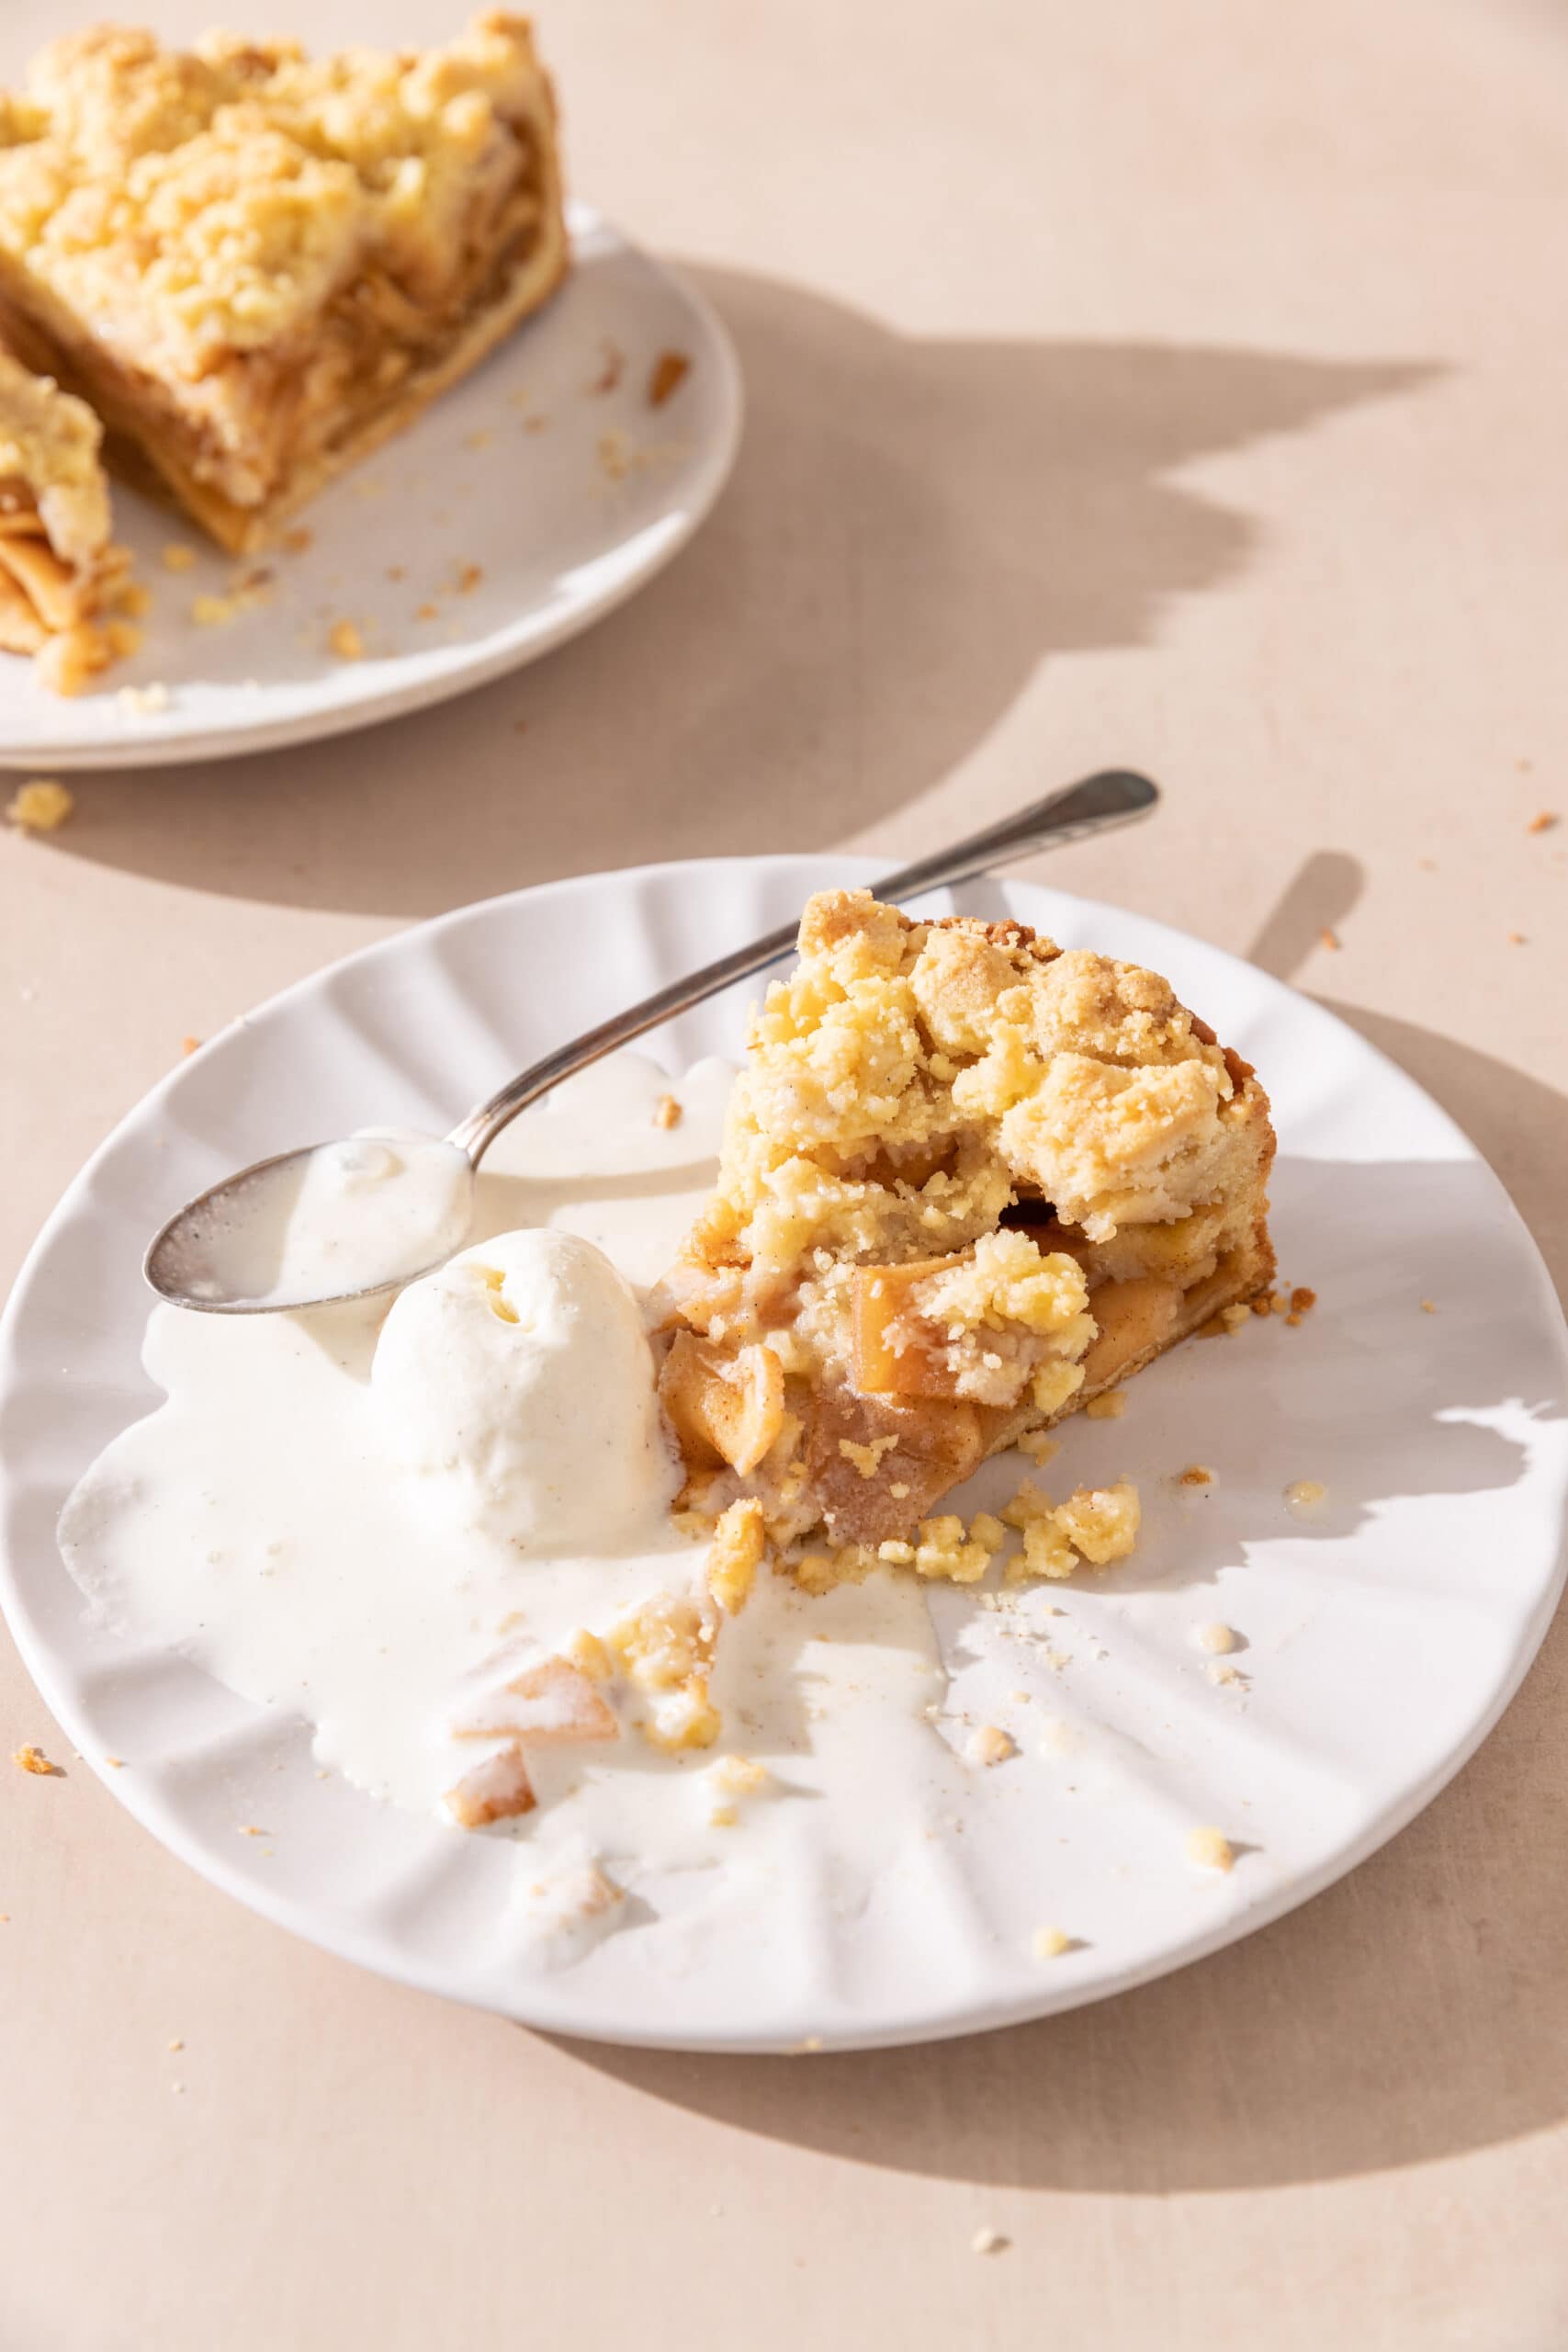 Slice of apple streusel pie with a side of vanilla ice cream.